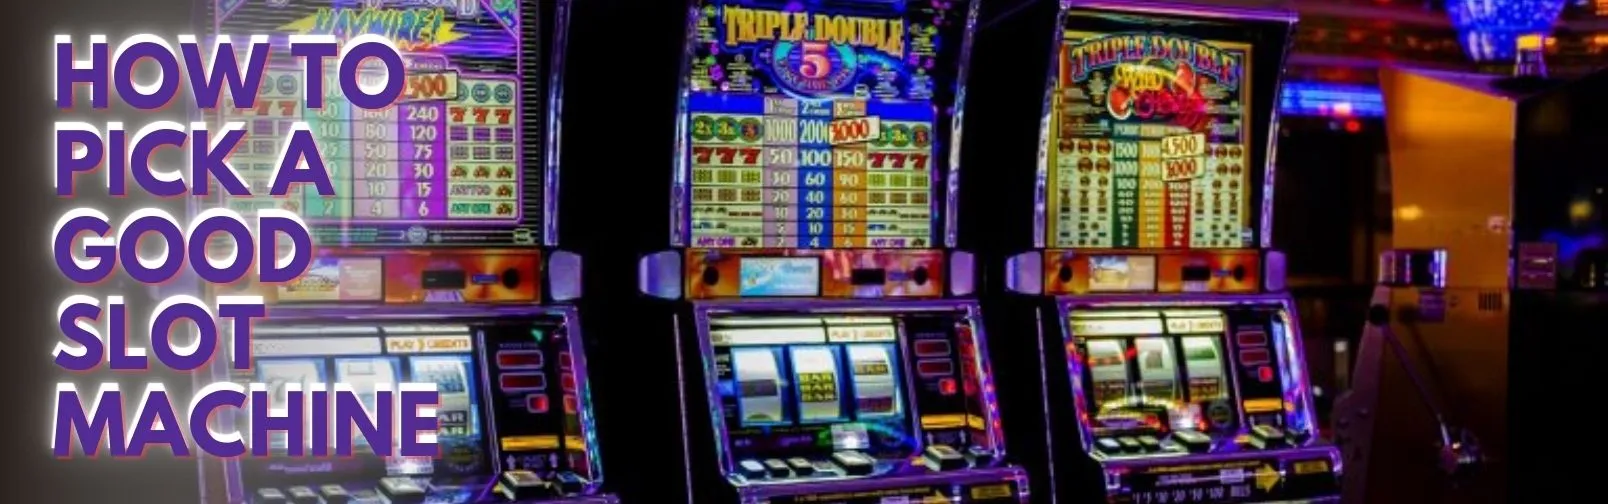 How To Pick the Winning Slot Machine Every Time